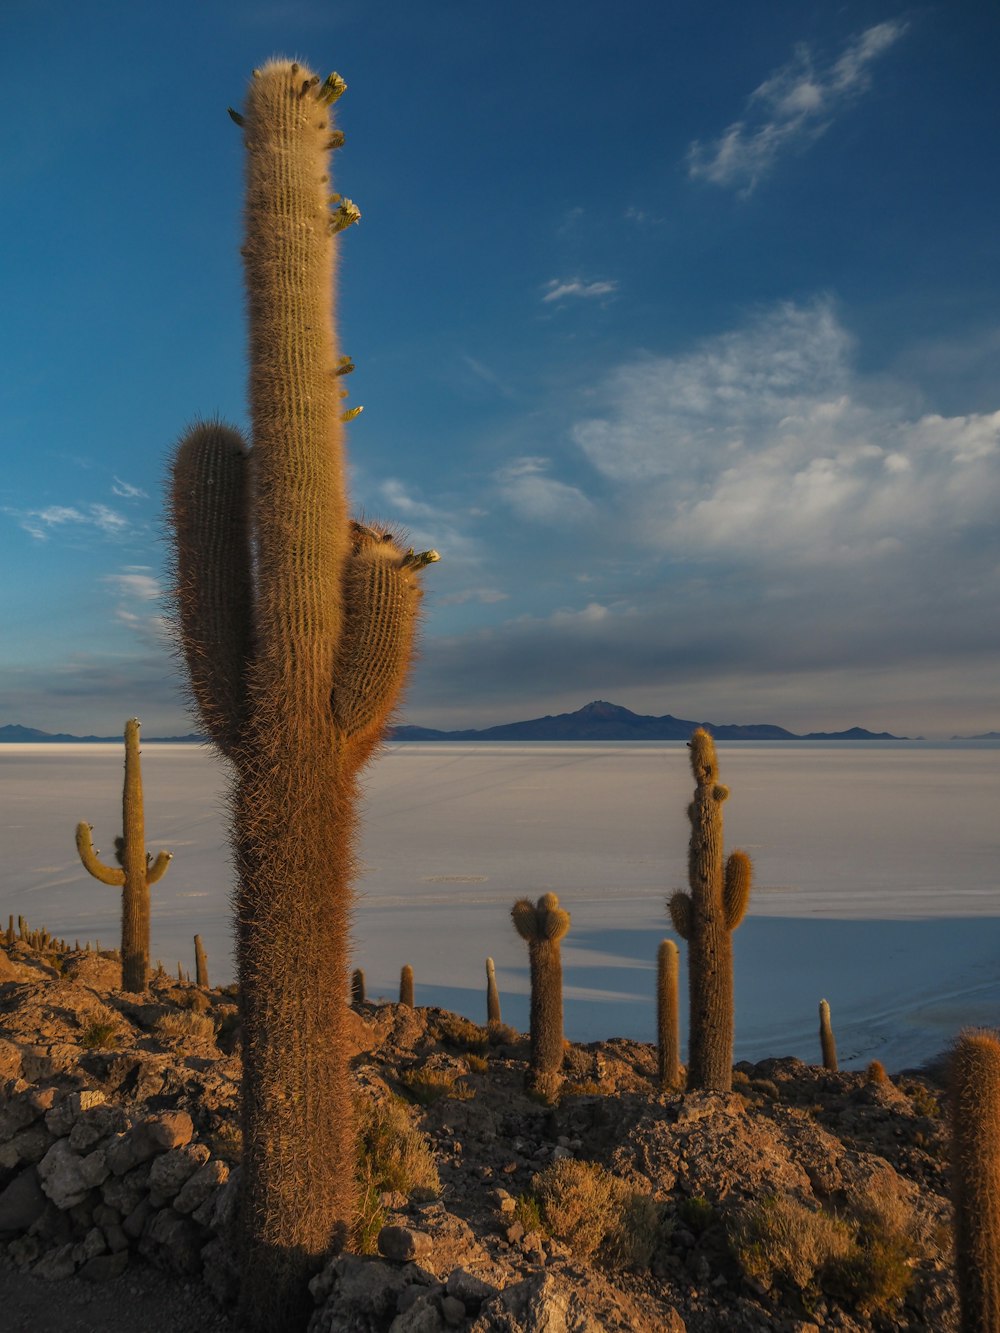 brown cactus on brown rock near body of water during daytime